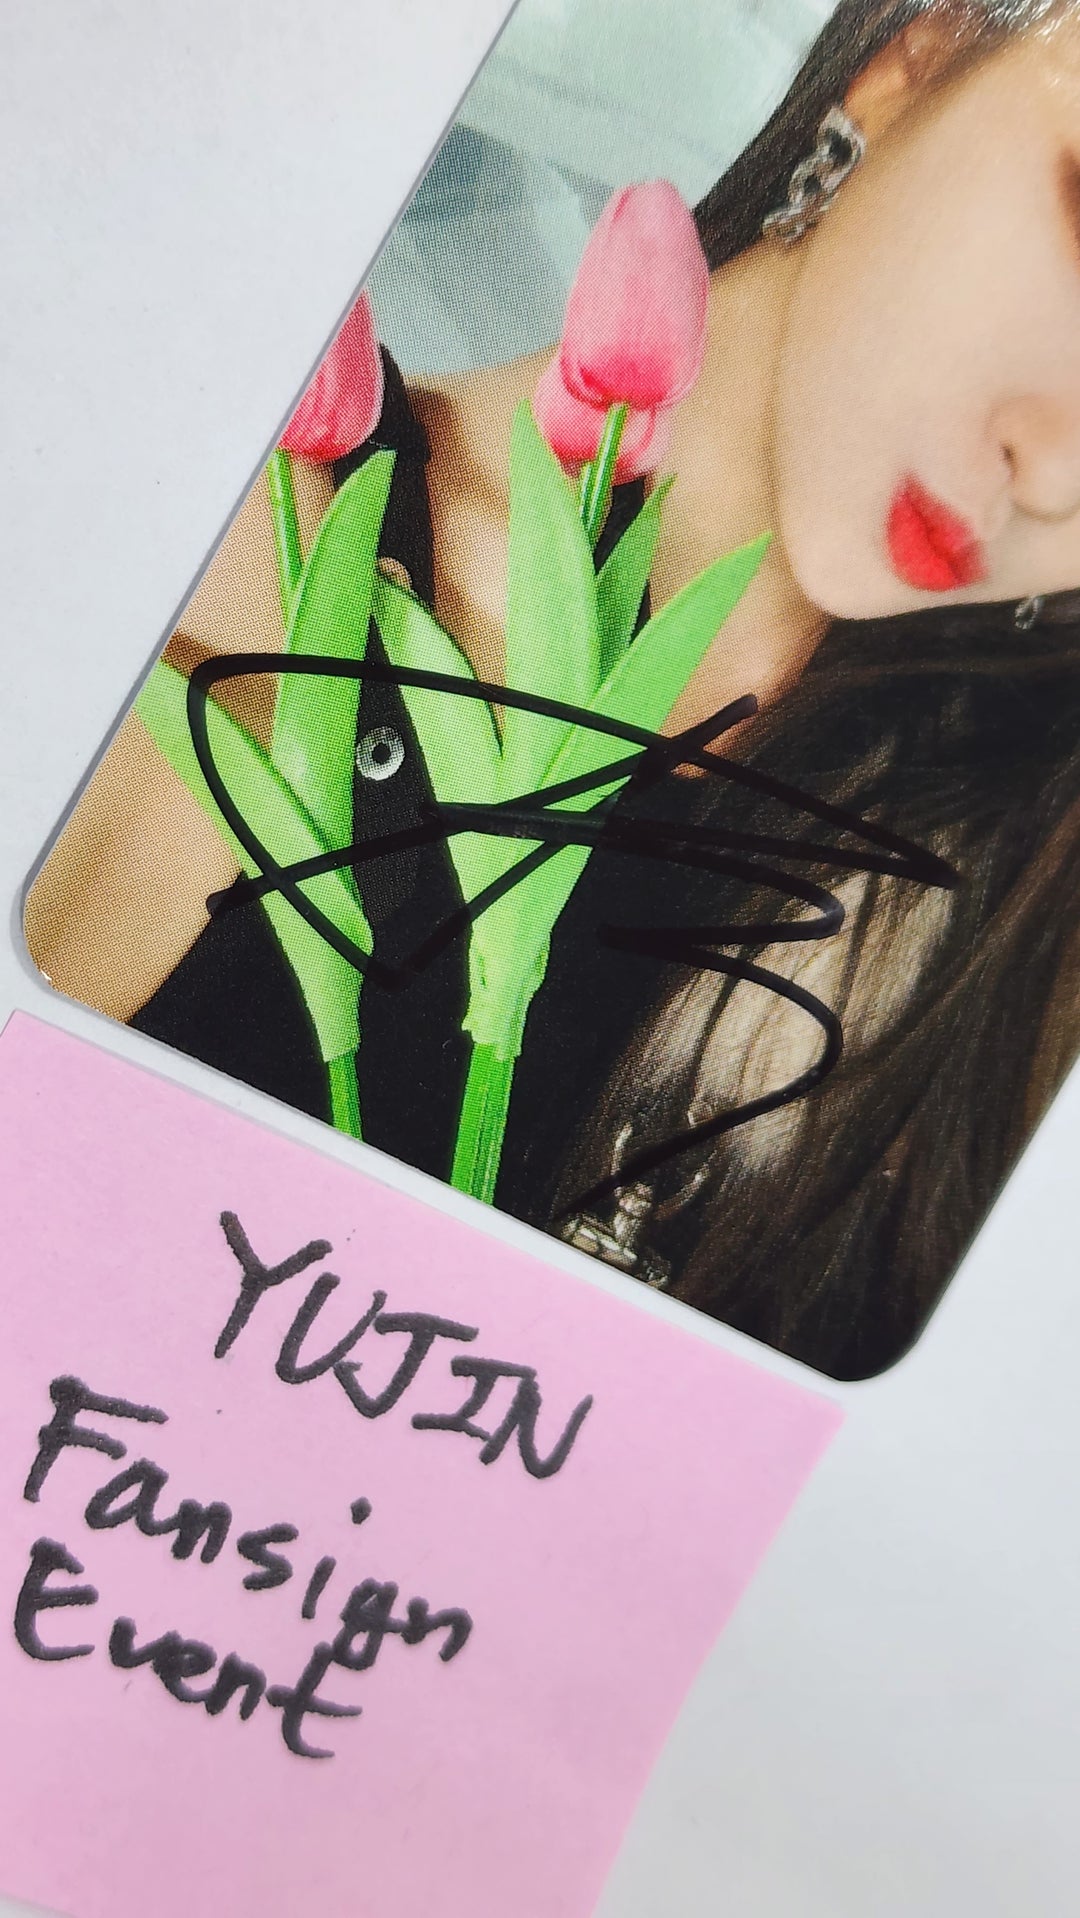 Yujin (of IVE) 'After Like' - Hand Autographed(Signed) Photocard